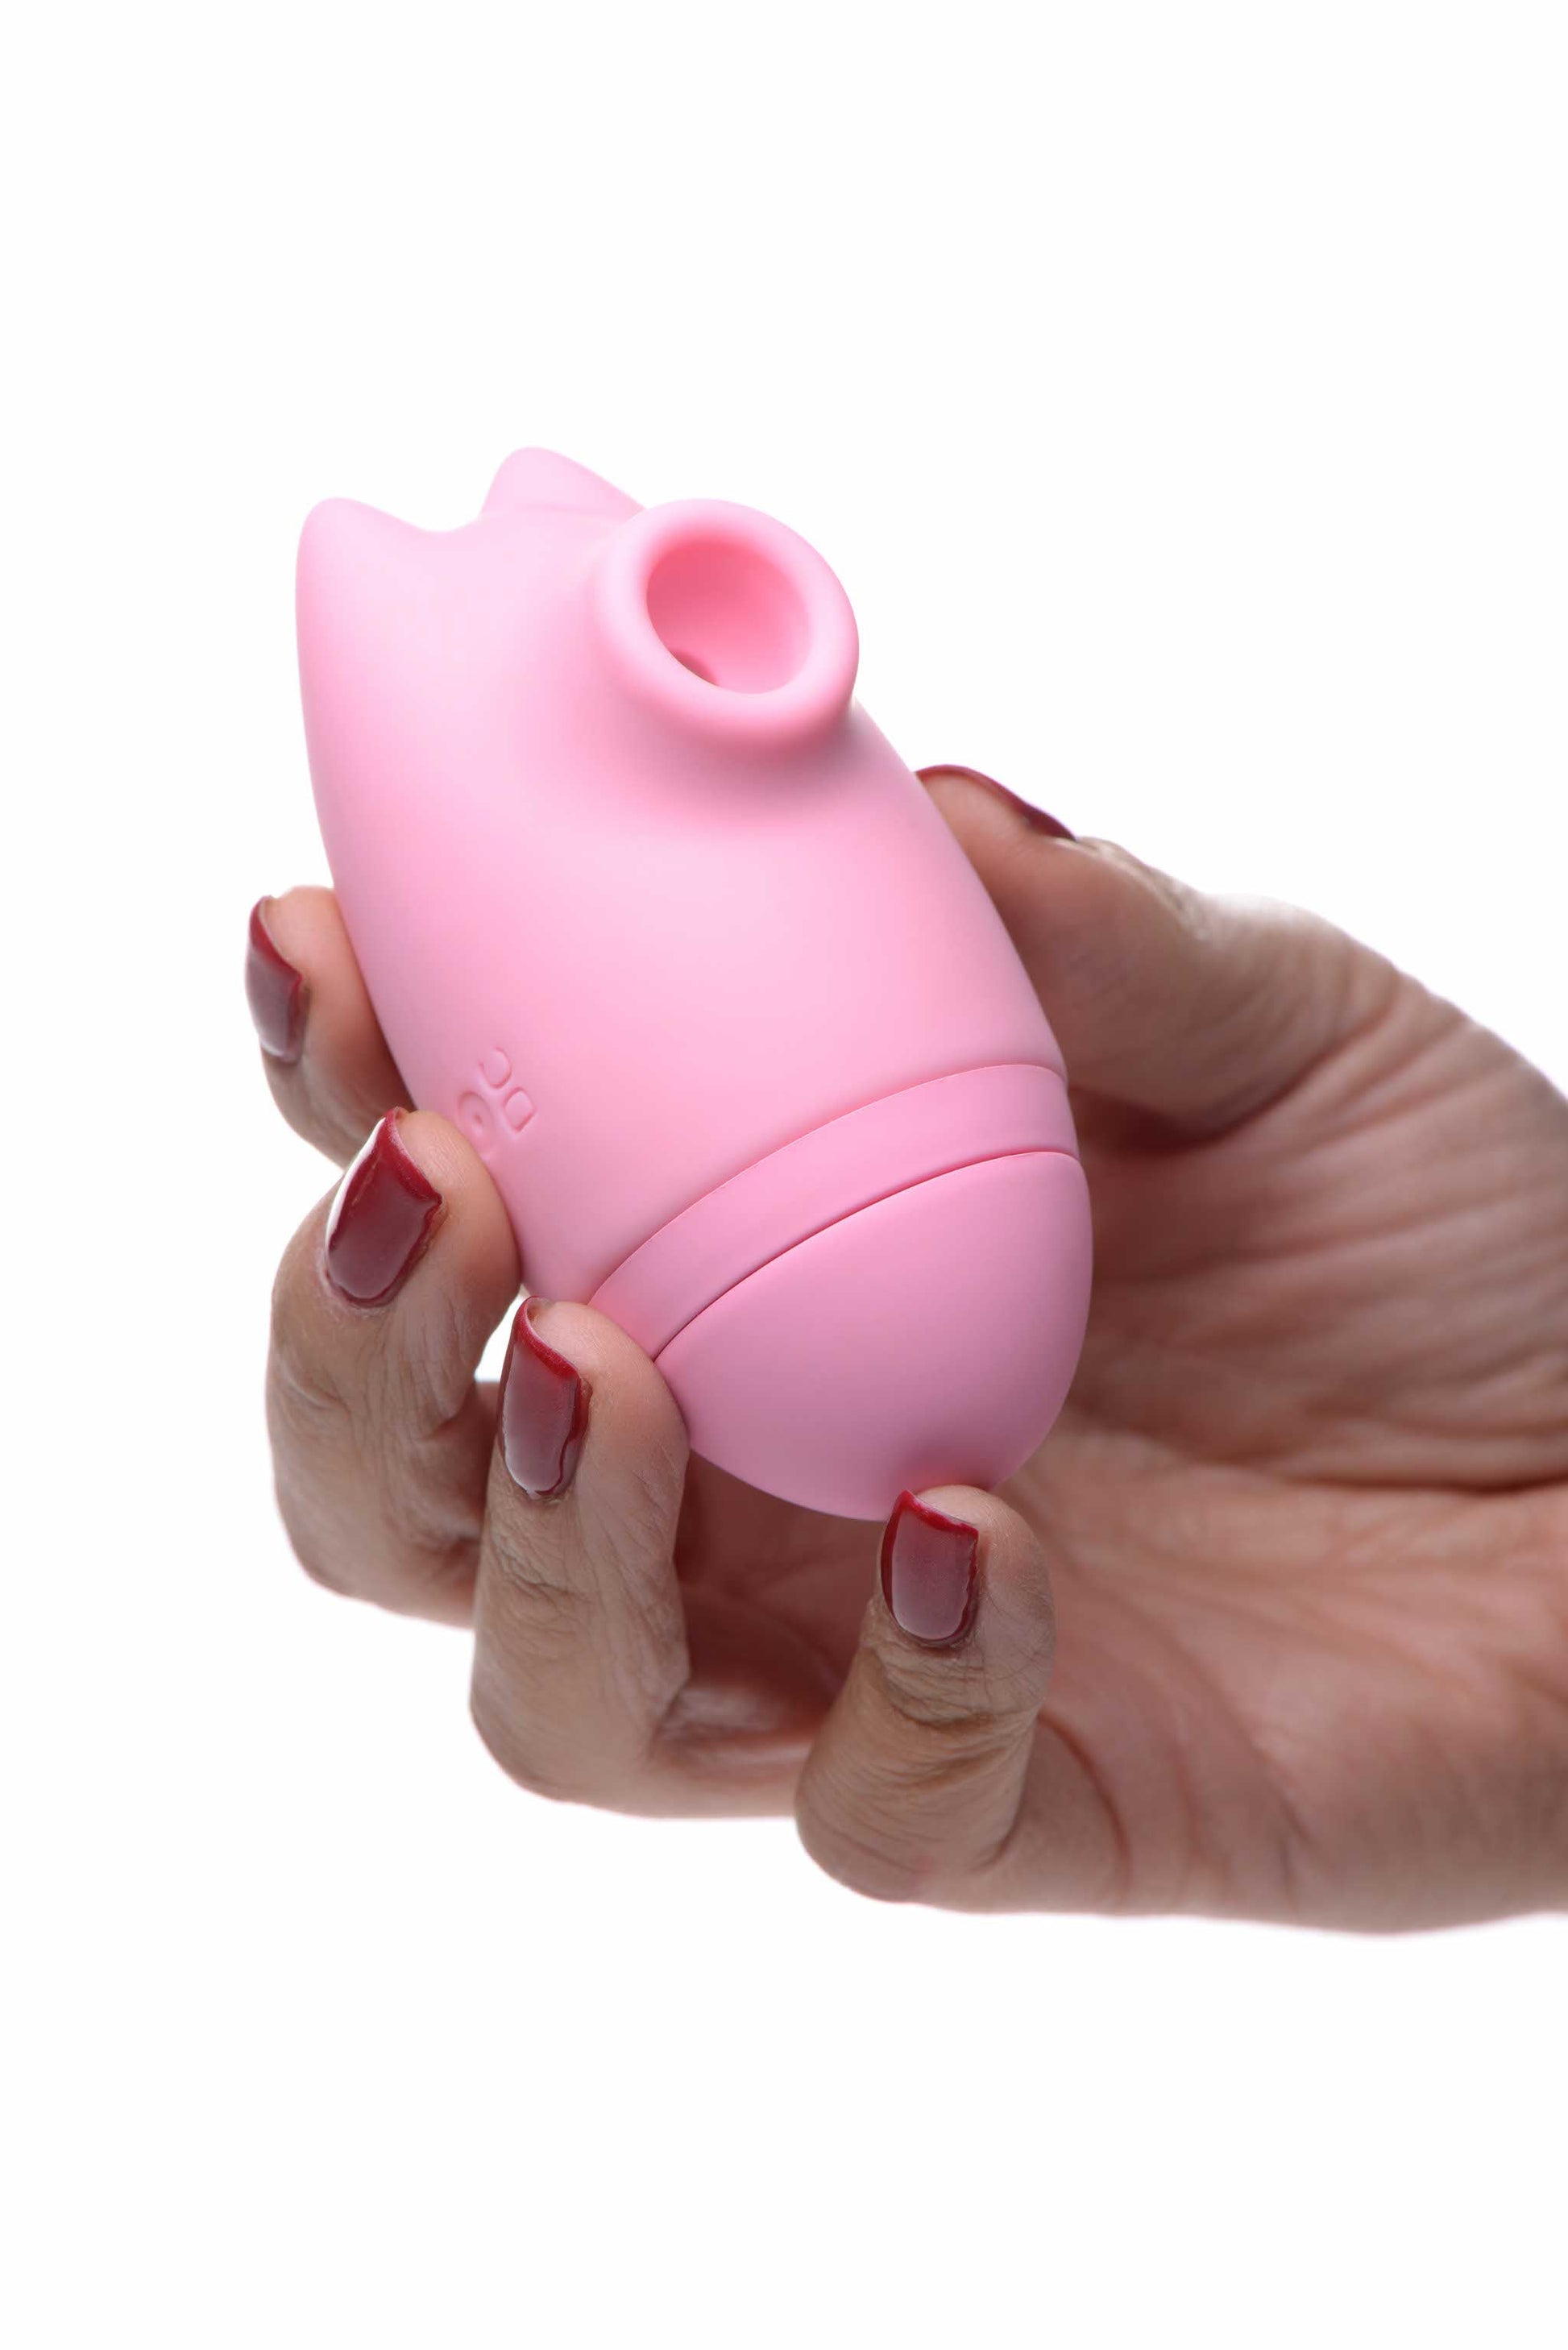 person holding the inmi shegasm kitty licker 5x silicone rechargeable clit stimulator pink xr-ag628